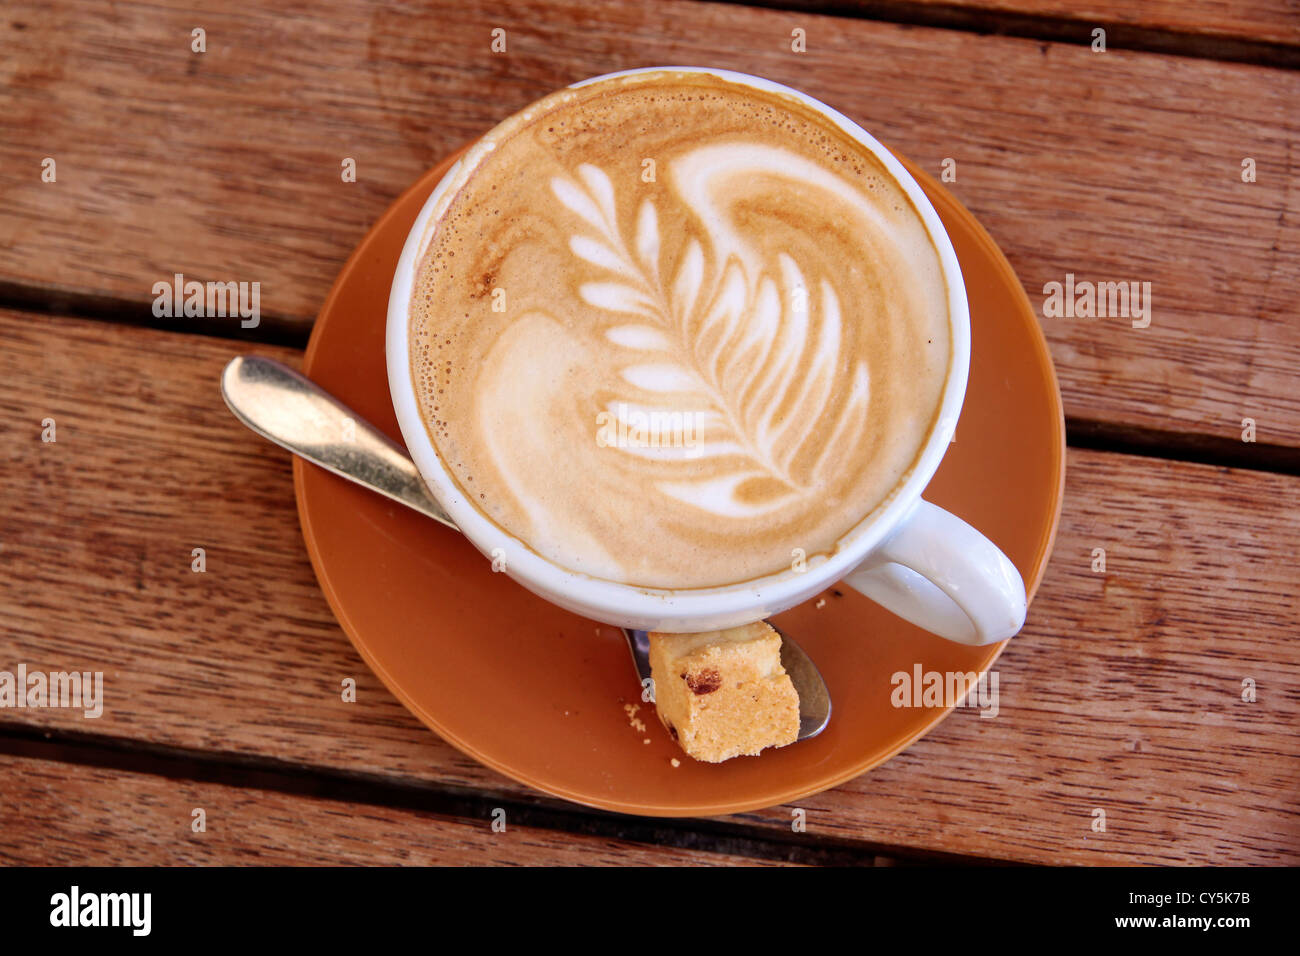 Cappuccino with leaf symbol on a wooden table Stock Photo - Alamy